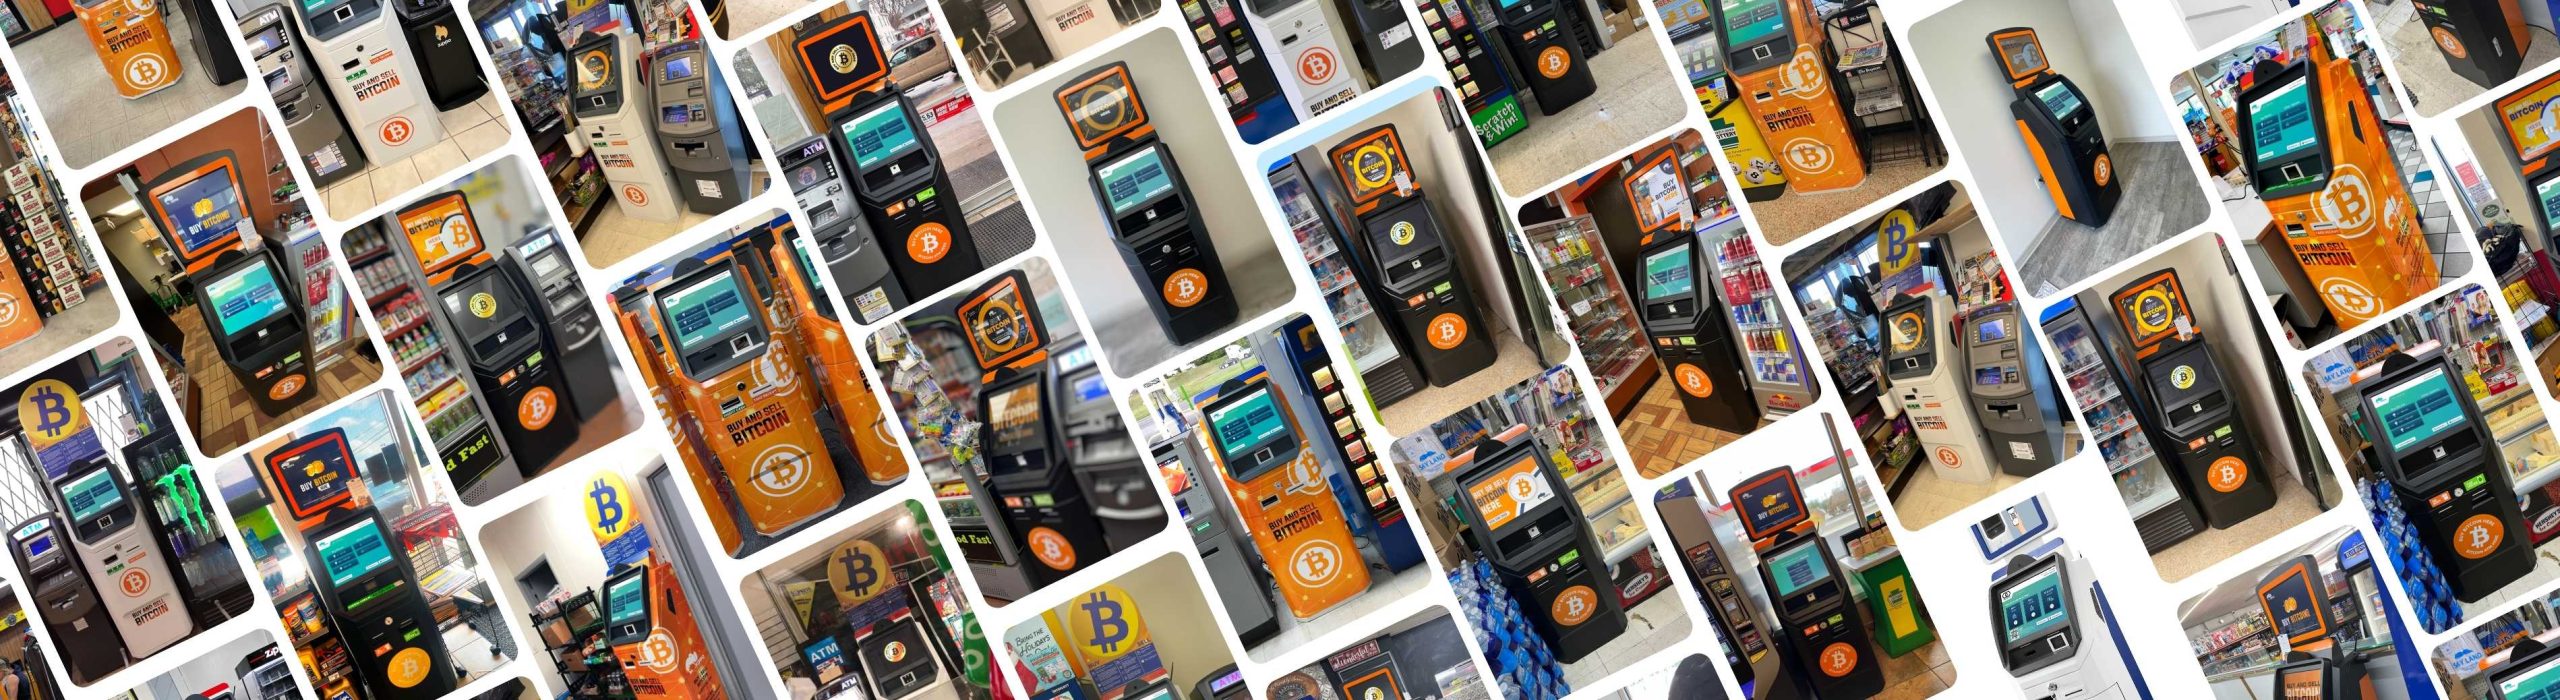 Bitcoin ATM Products by ChainBytes